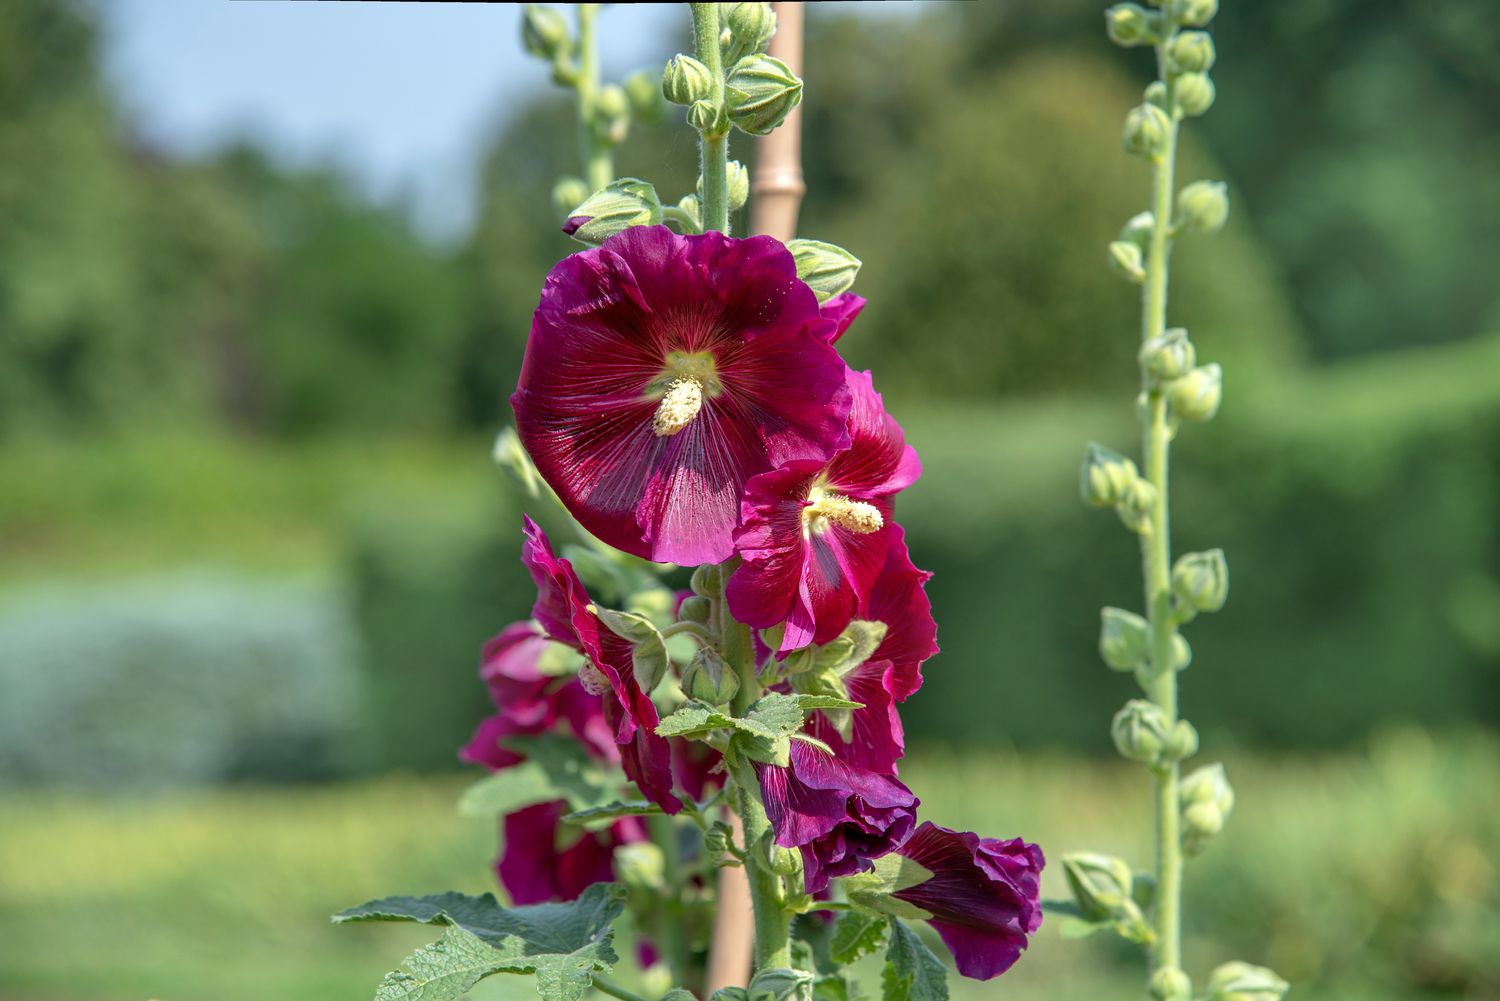 Common hollyhock shrub with thin flower stalks with buds and deep pink flowers